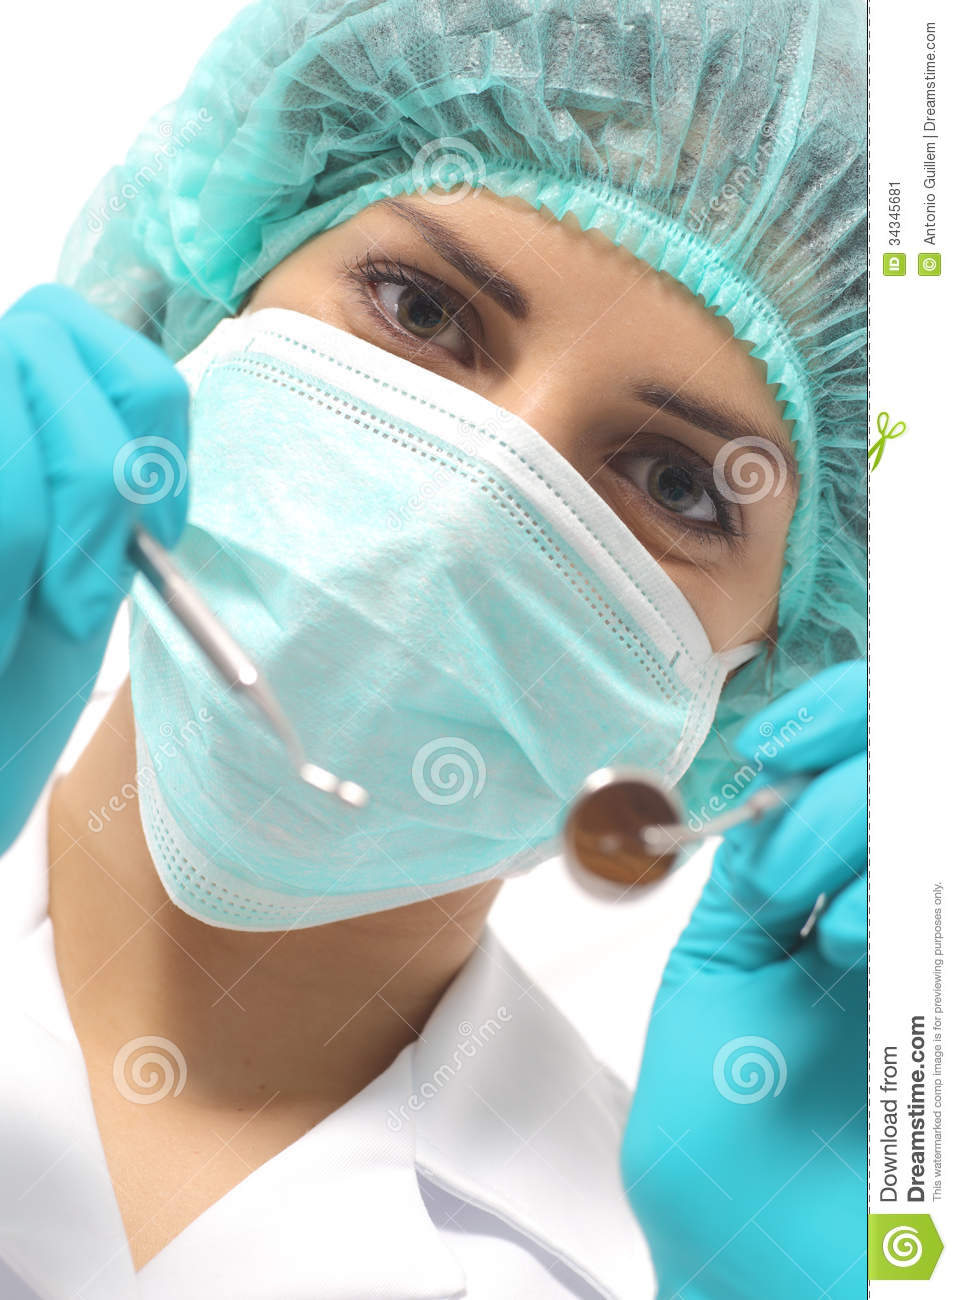 Close Up Of A Dentist Woman With A Mask Holding Tools Ready To Operate